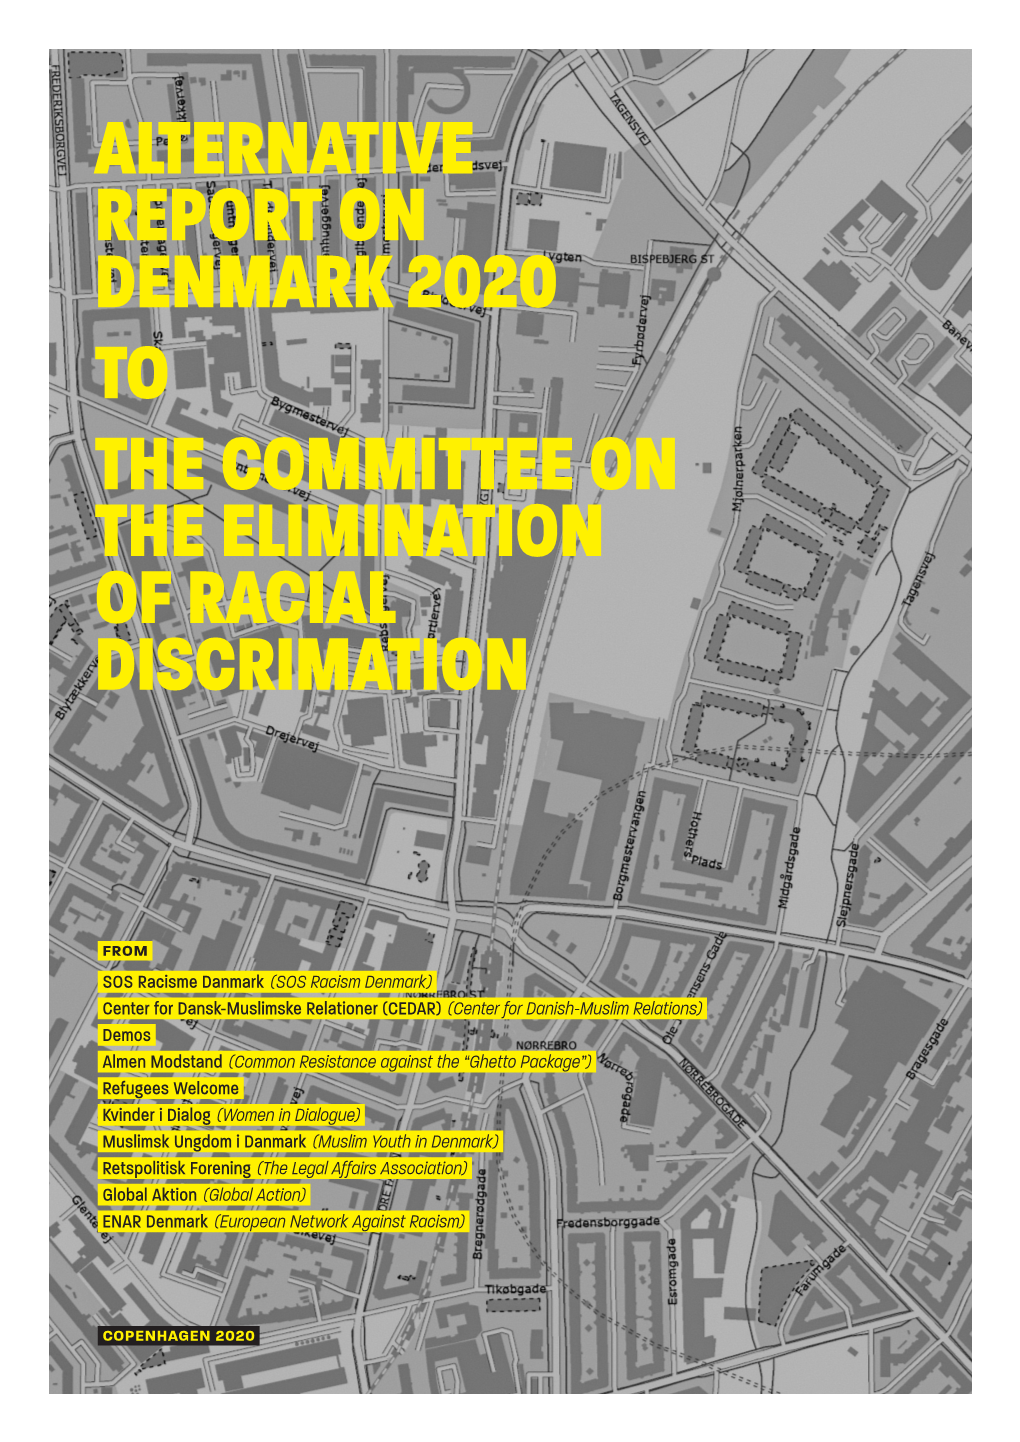 Alternative Report on Denmark 2020 to the Committee on the Elimination of Racial Discrimation